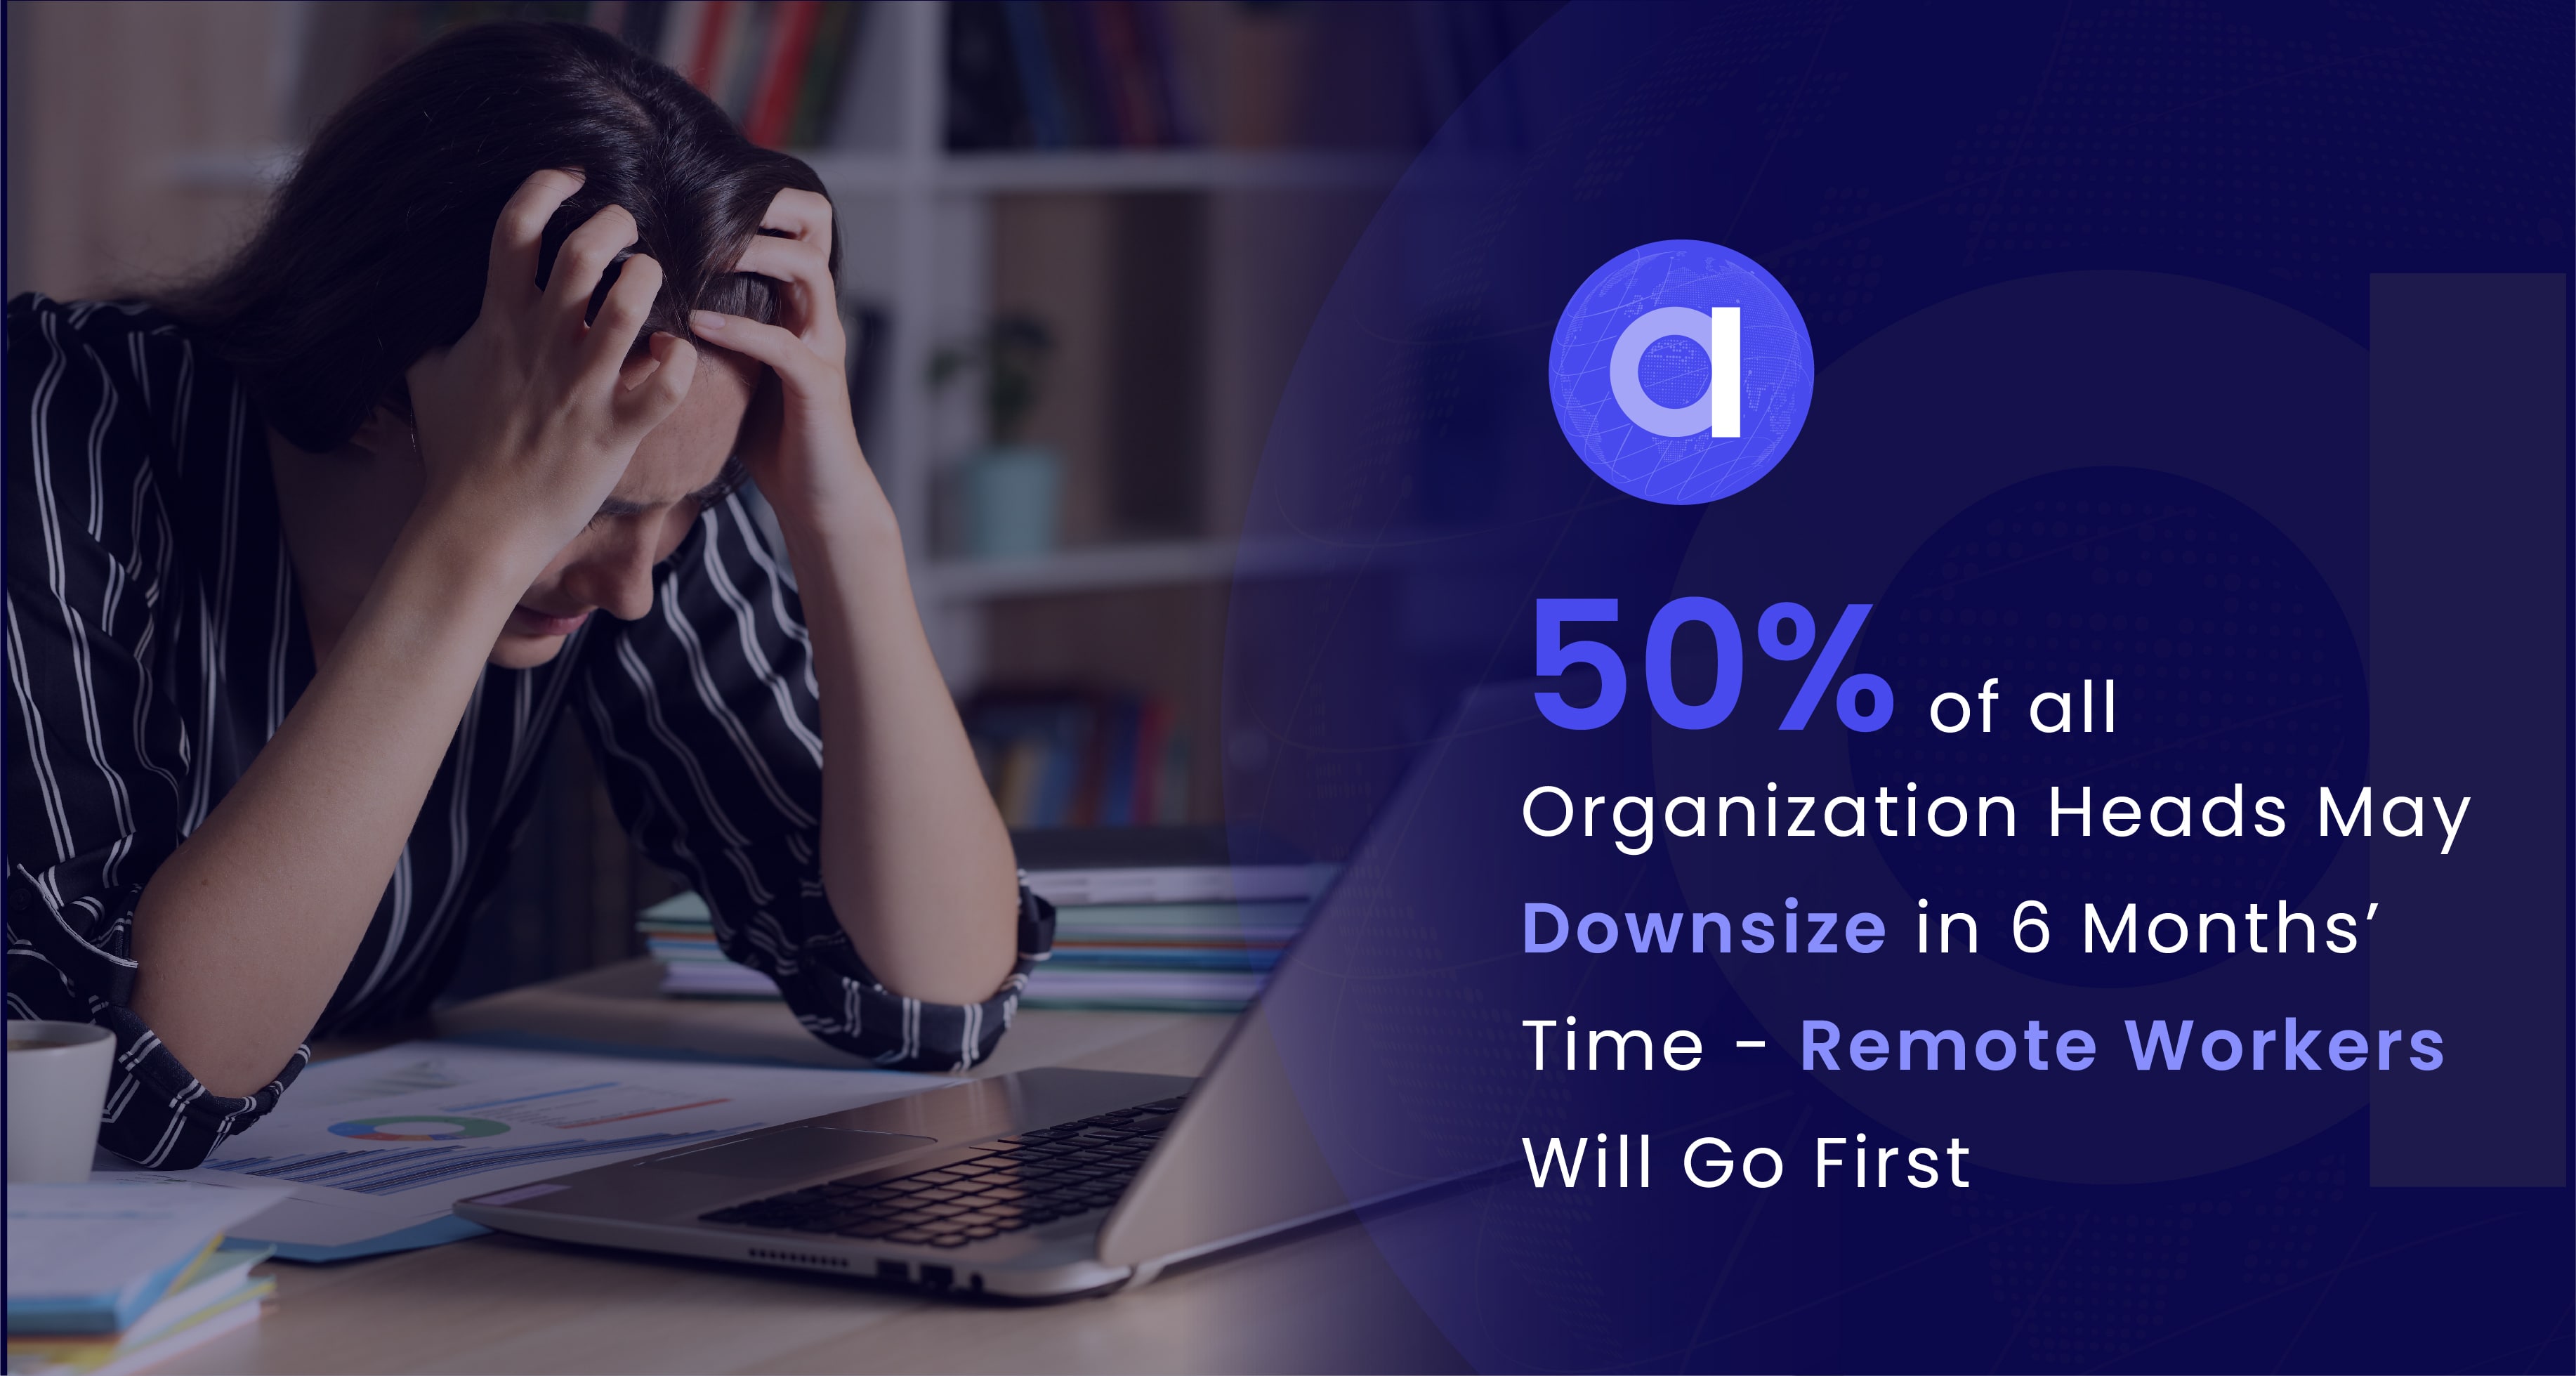 50% of all Organization Heads May Downsize in 6 Months’ Time - Remote Workers Will Go First